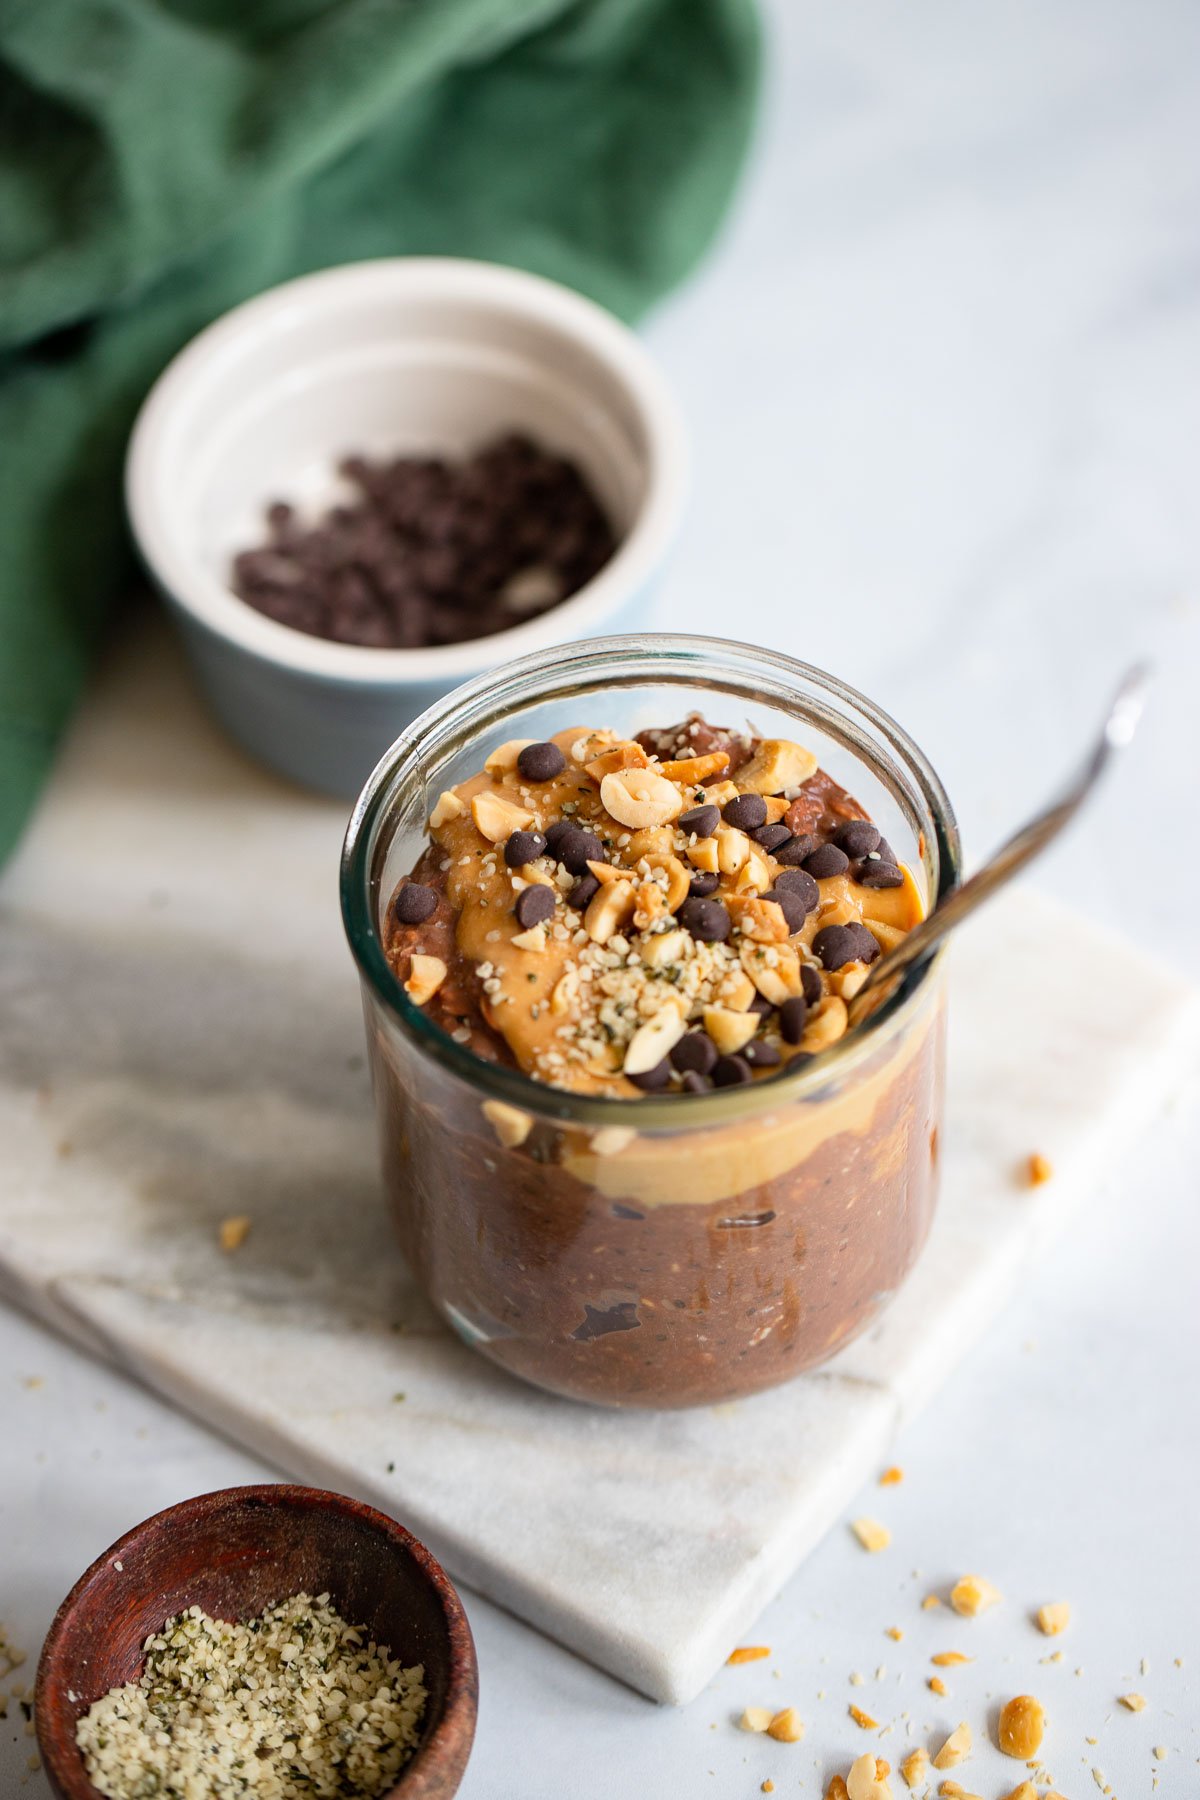 Overnight Oatmeal Chocolate Peanut Butter topped with chopped peanuts in a glass with a spoon.